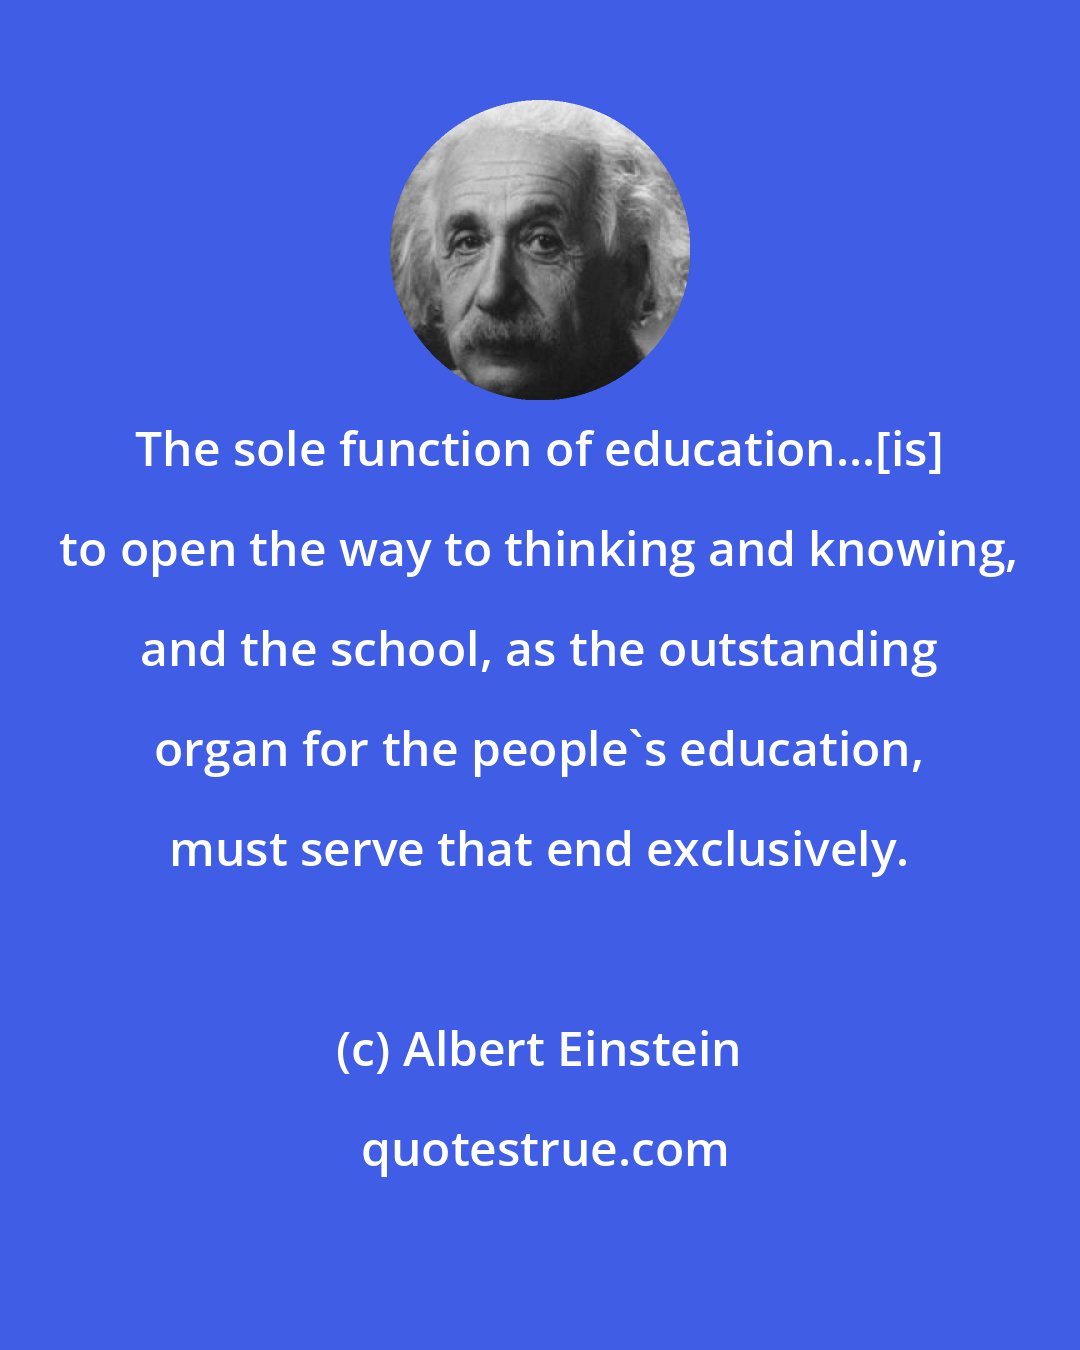 Albert Einstein: The sole function of education...[is] to open the way to thinking and knowing, and the school, as the outstanding organ for the people's education, must serve that end exclusively.